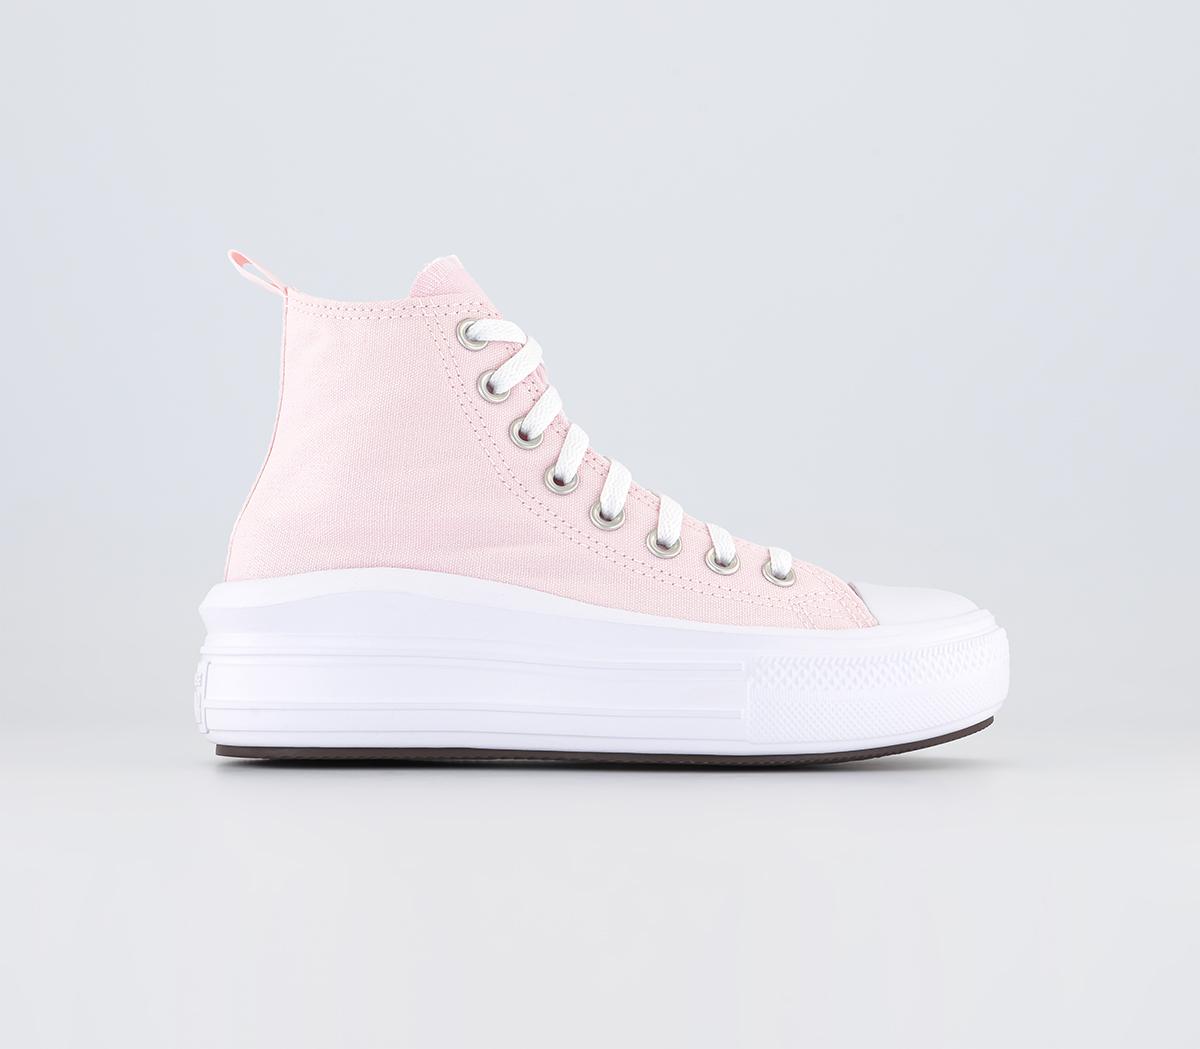 ConverseAll Star Move Junior Trainers Decade Pink White Black